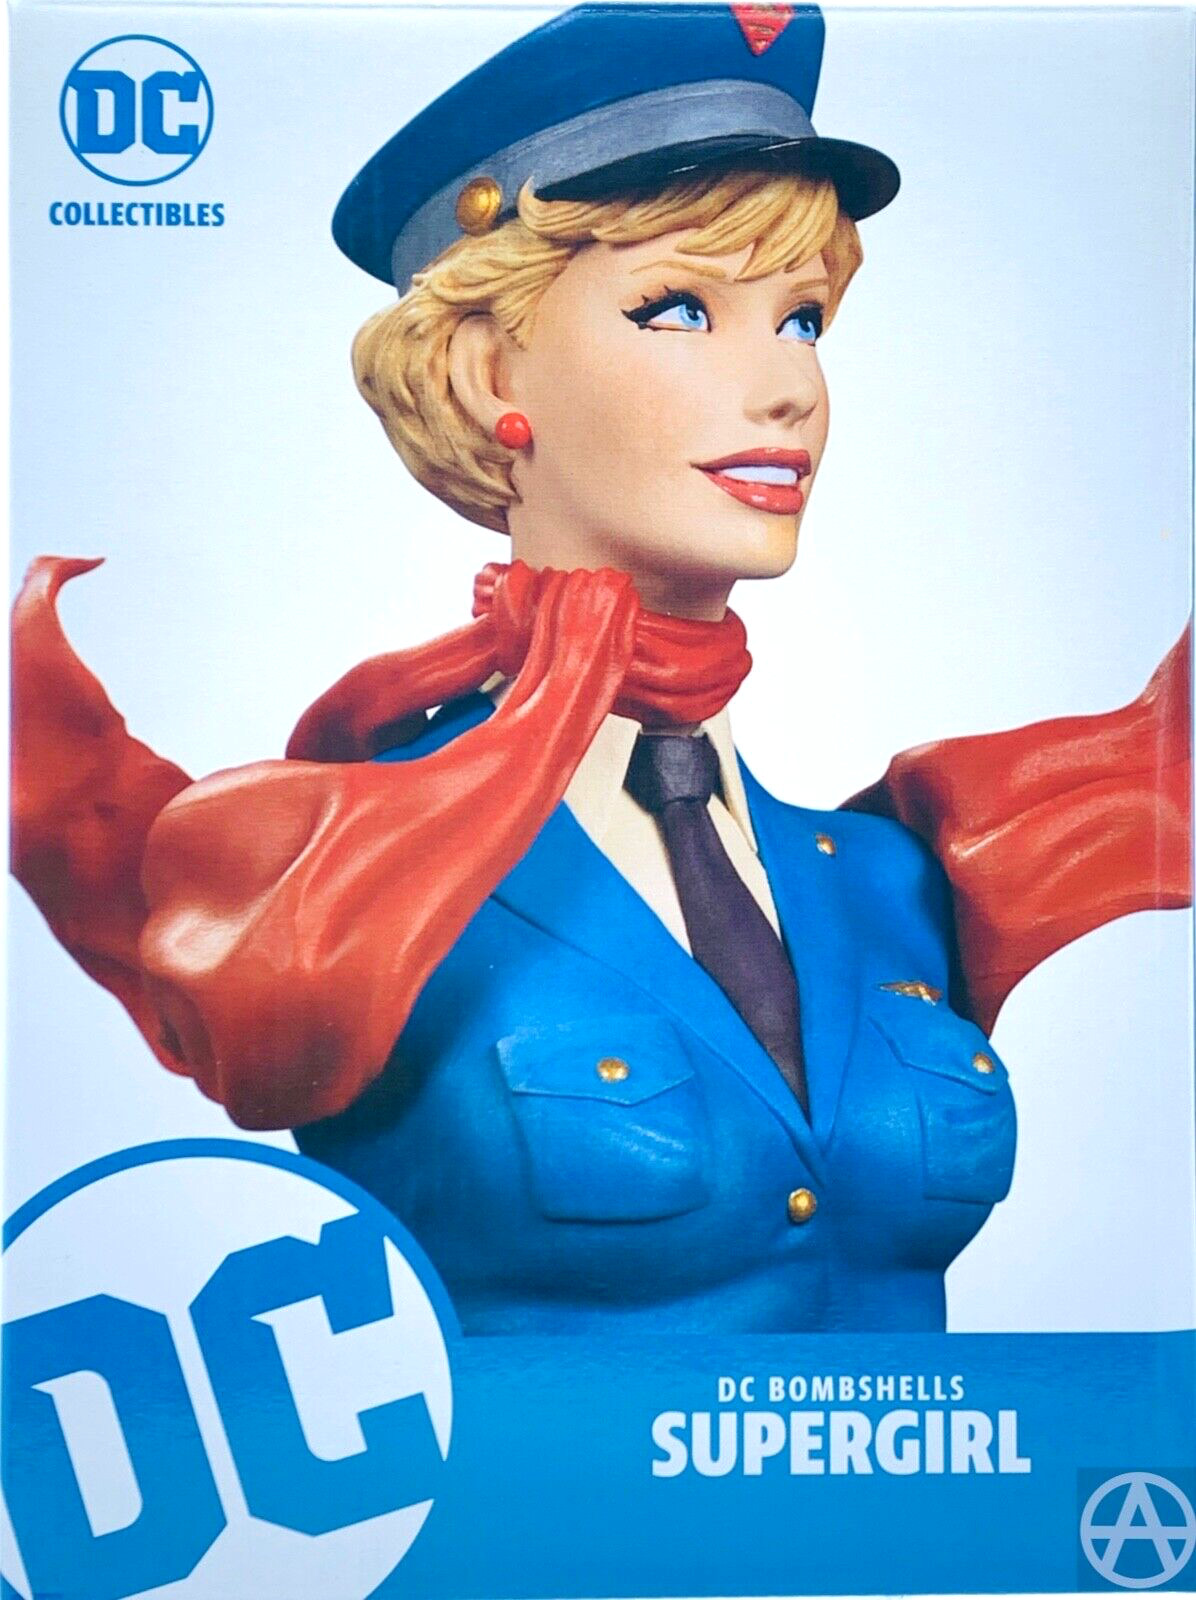 DC Collectibles SUPERGIRL Limited Edition Bombshells Bust